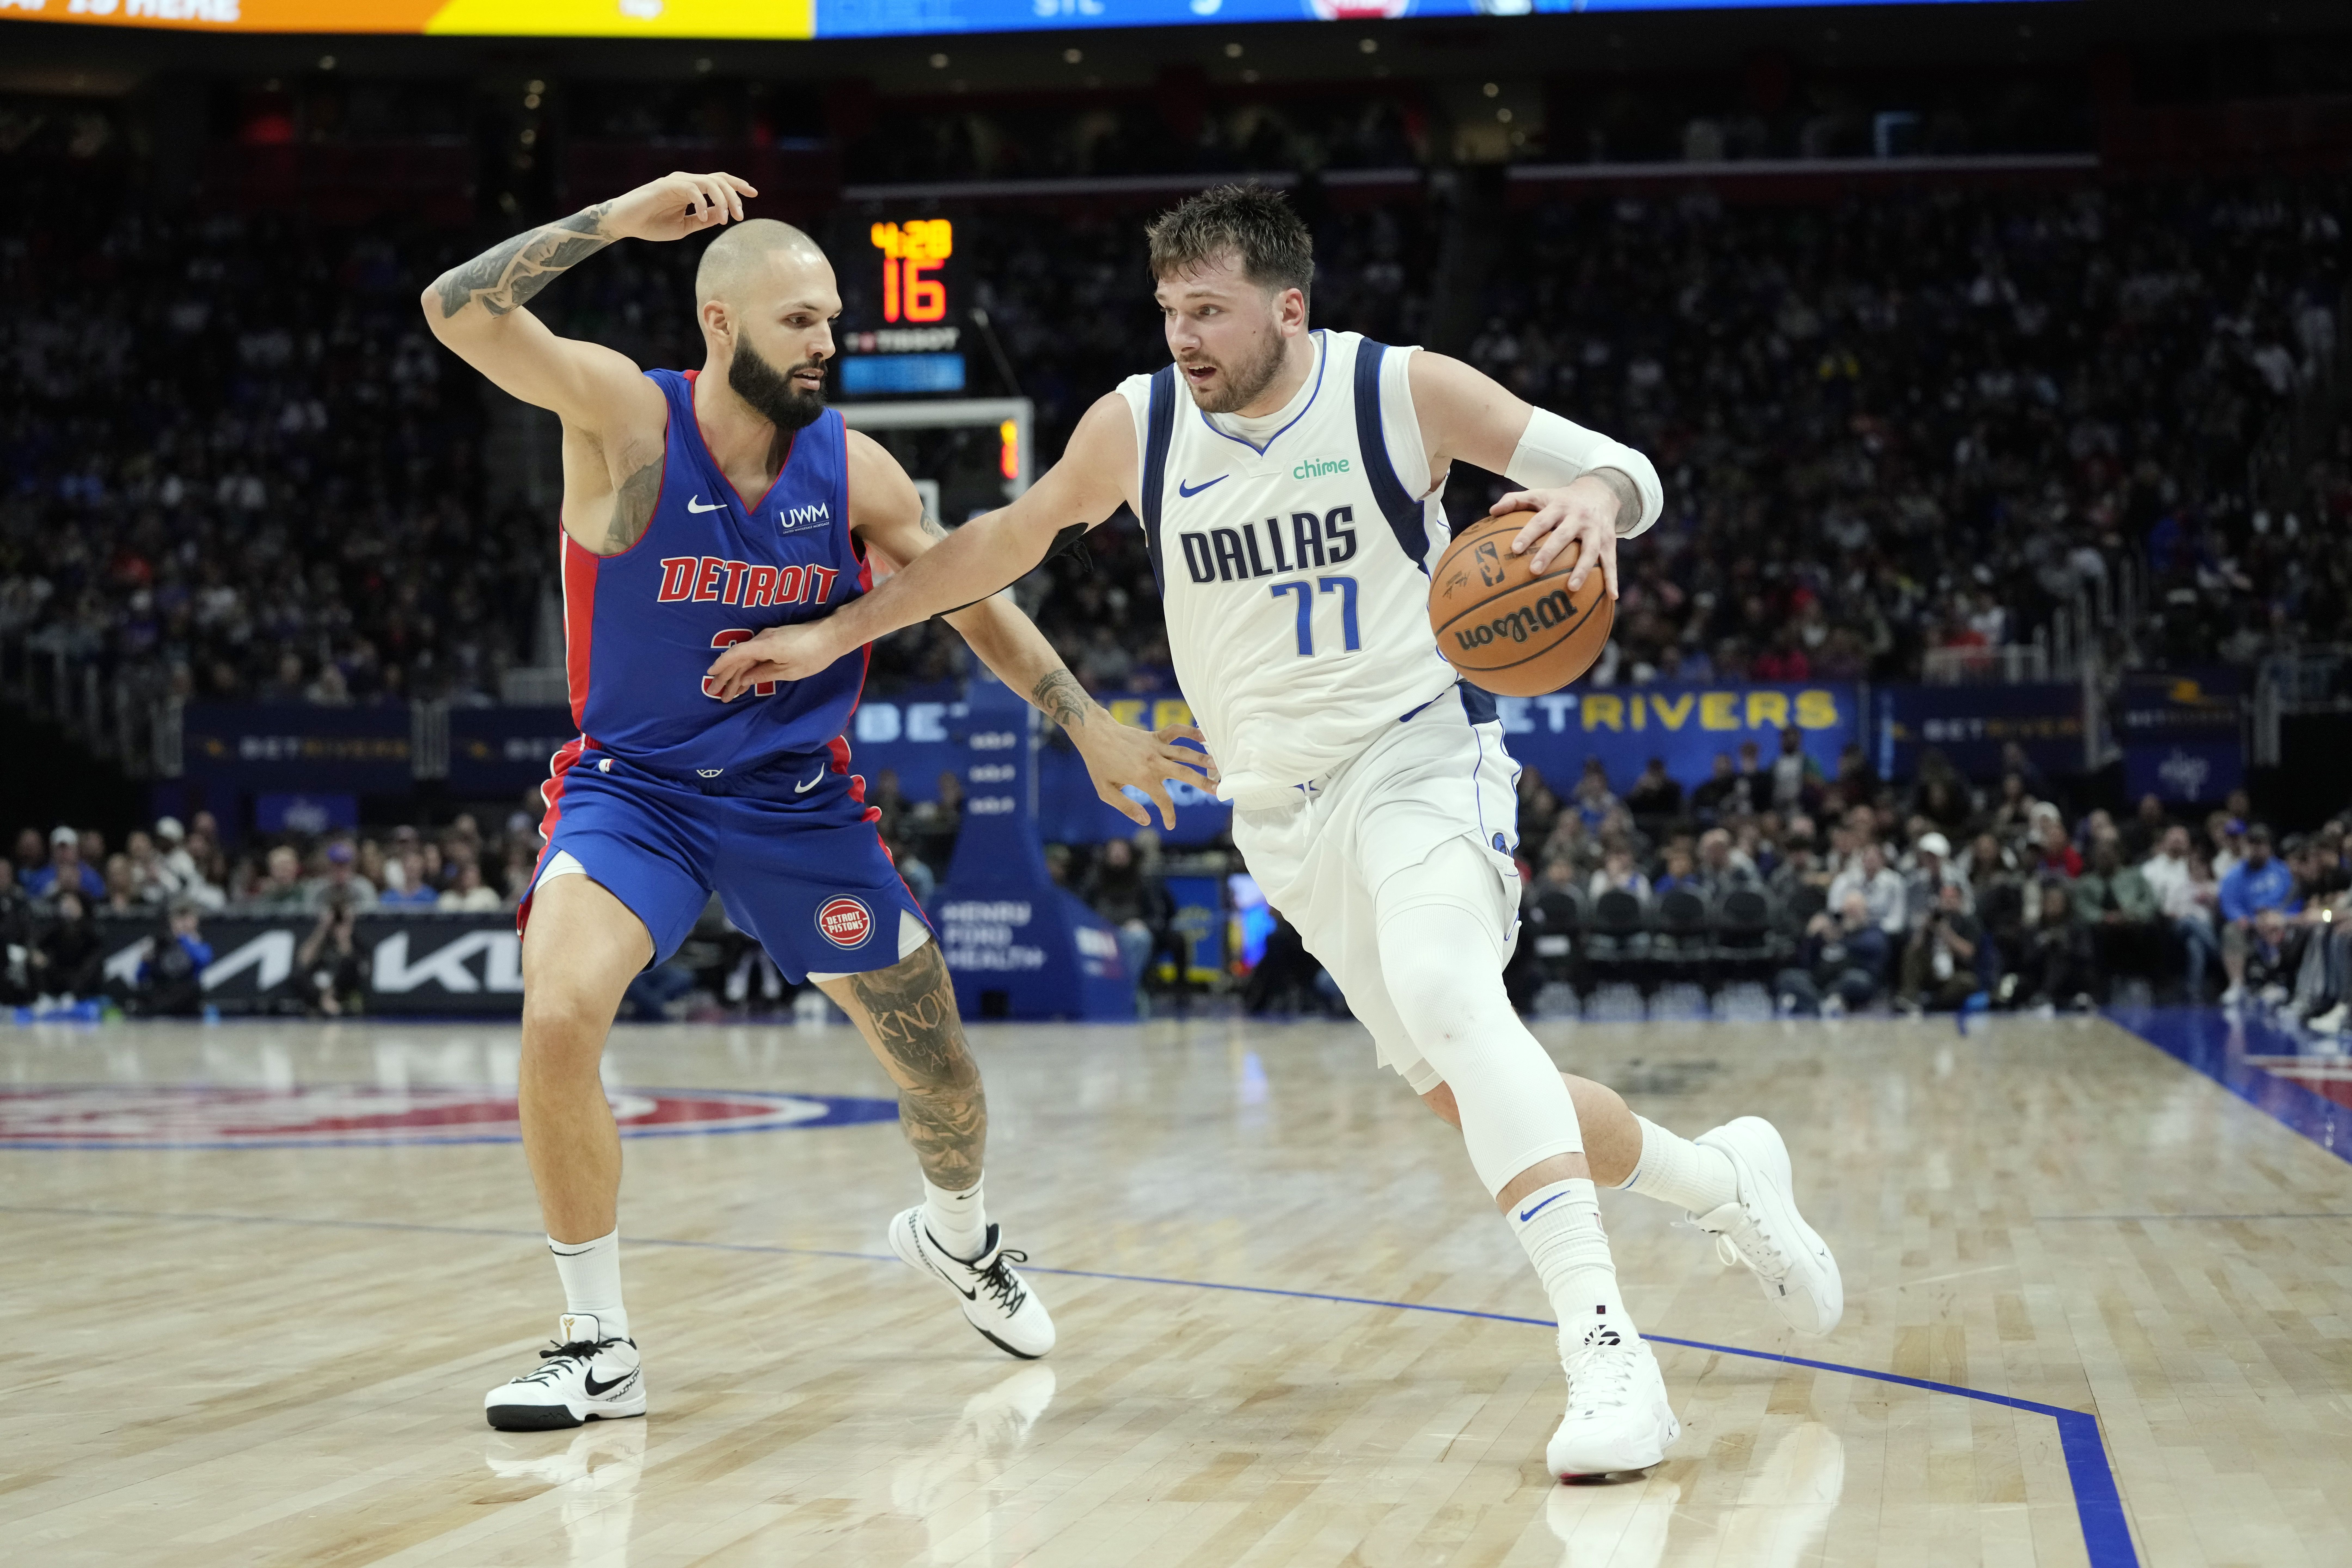 Luka Doncic hits a record triple-double as Slovenia effectively